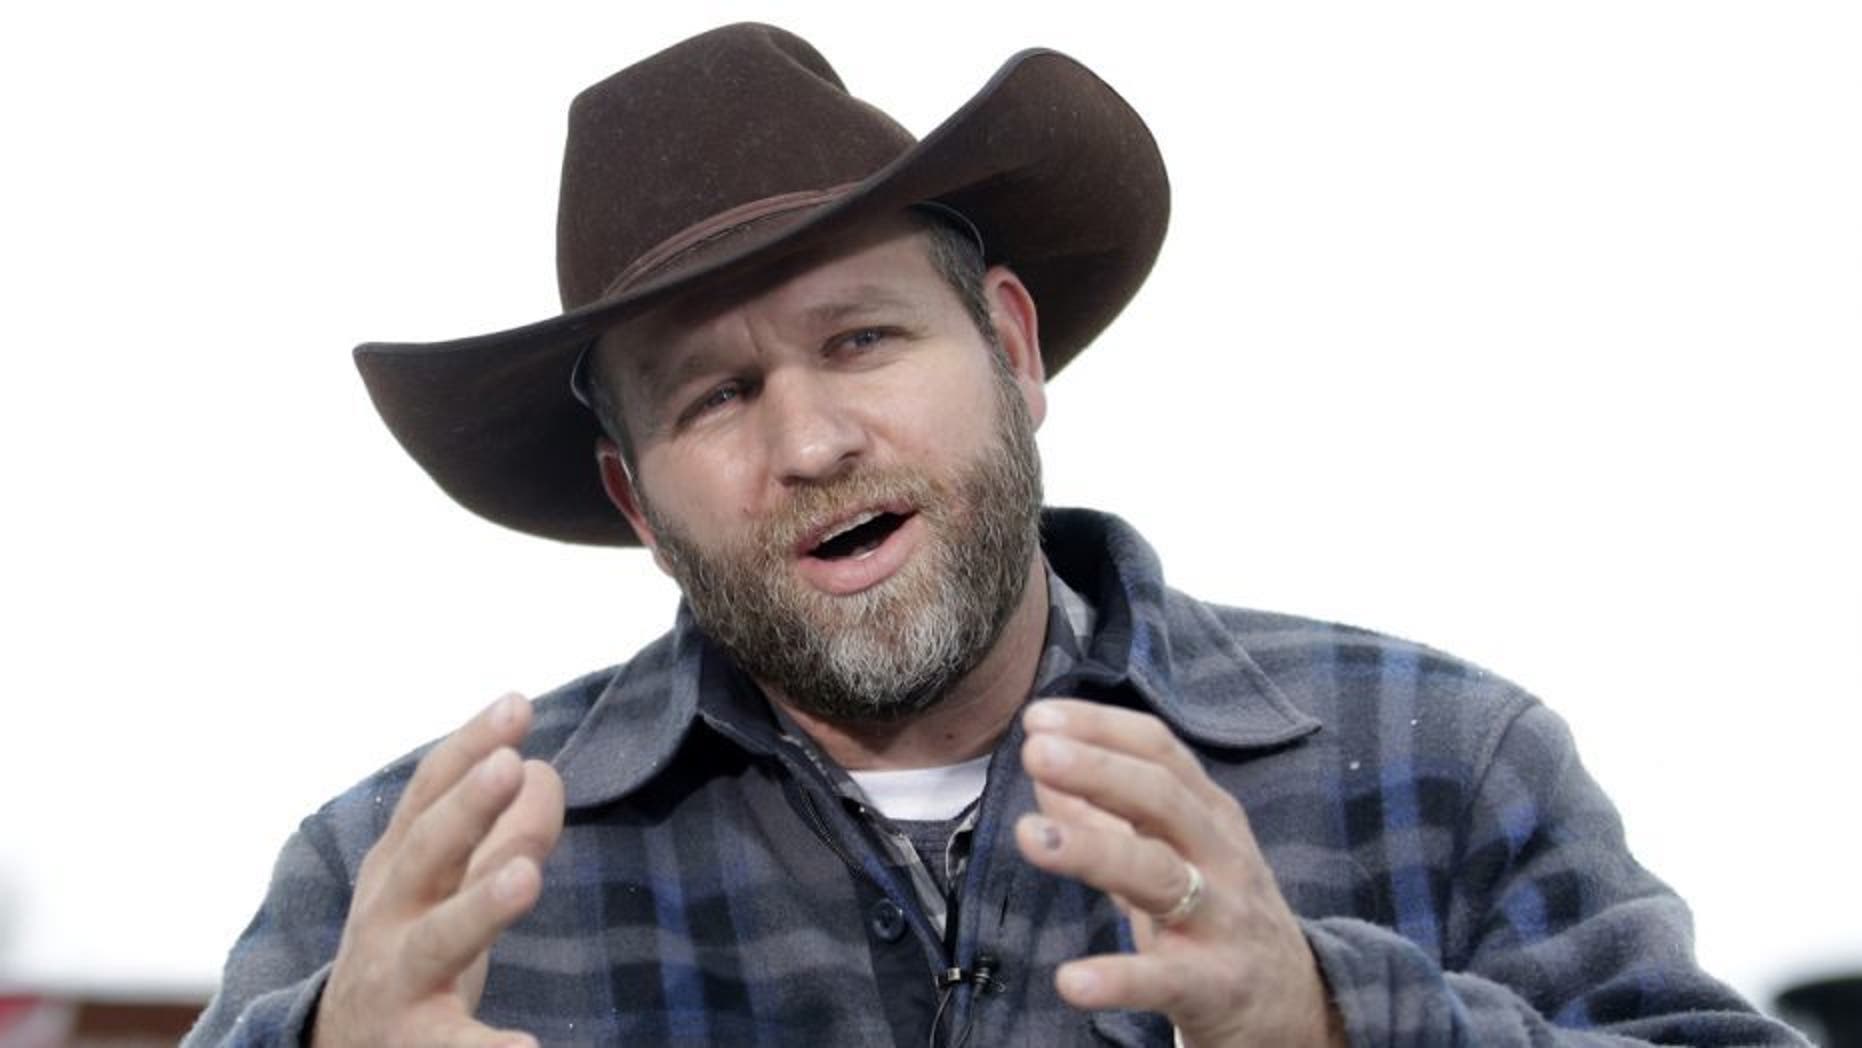 Ammon Bundy said he was leaving social media after receiving backlash from his Trump criticism.